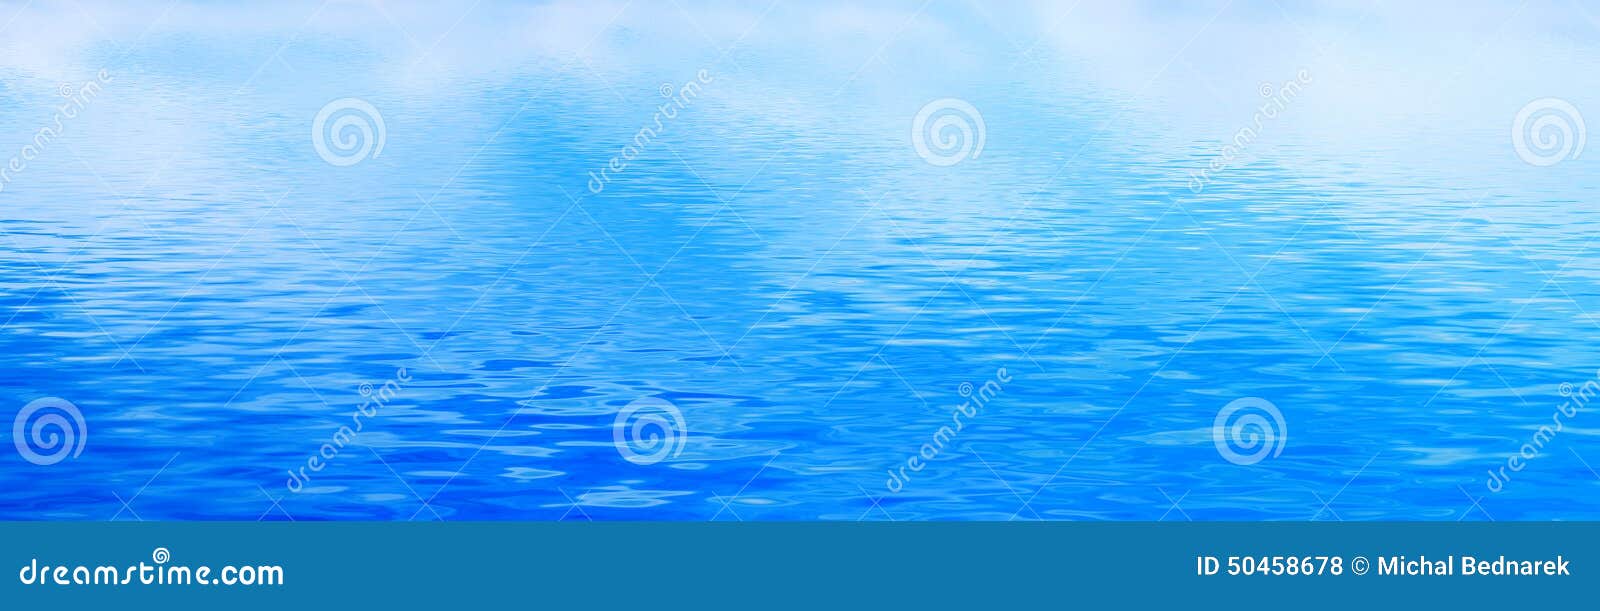 clean water background, calm waves. banner, panorama